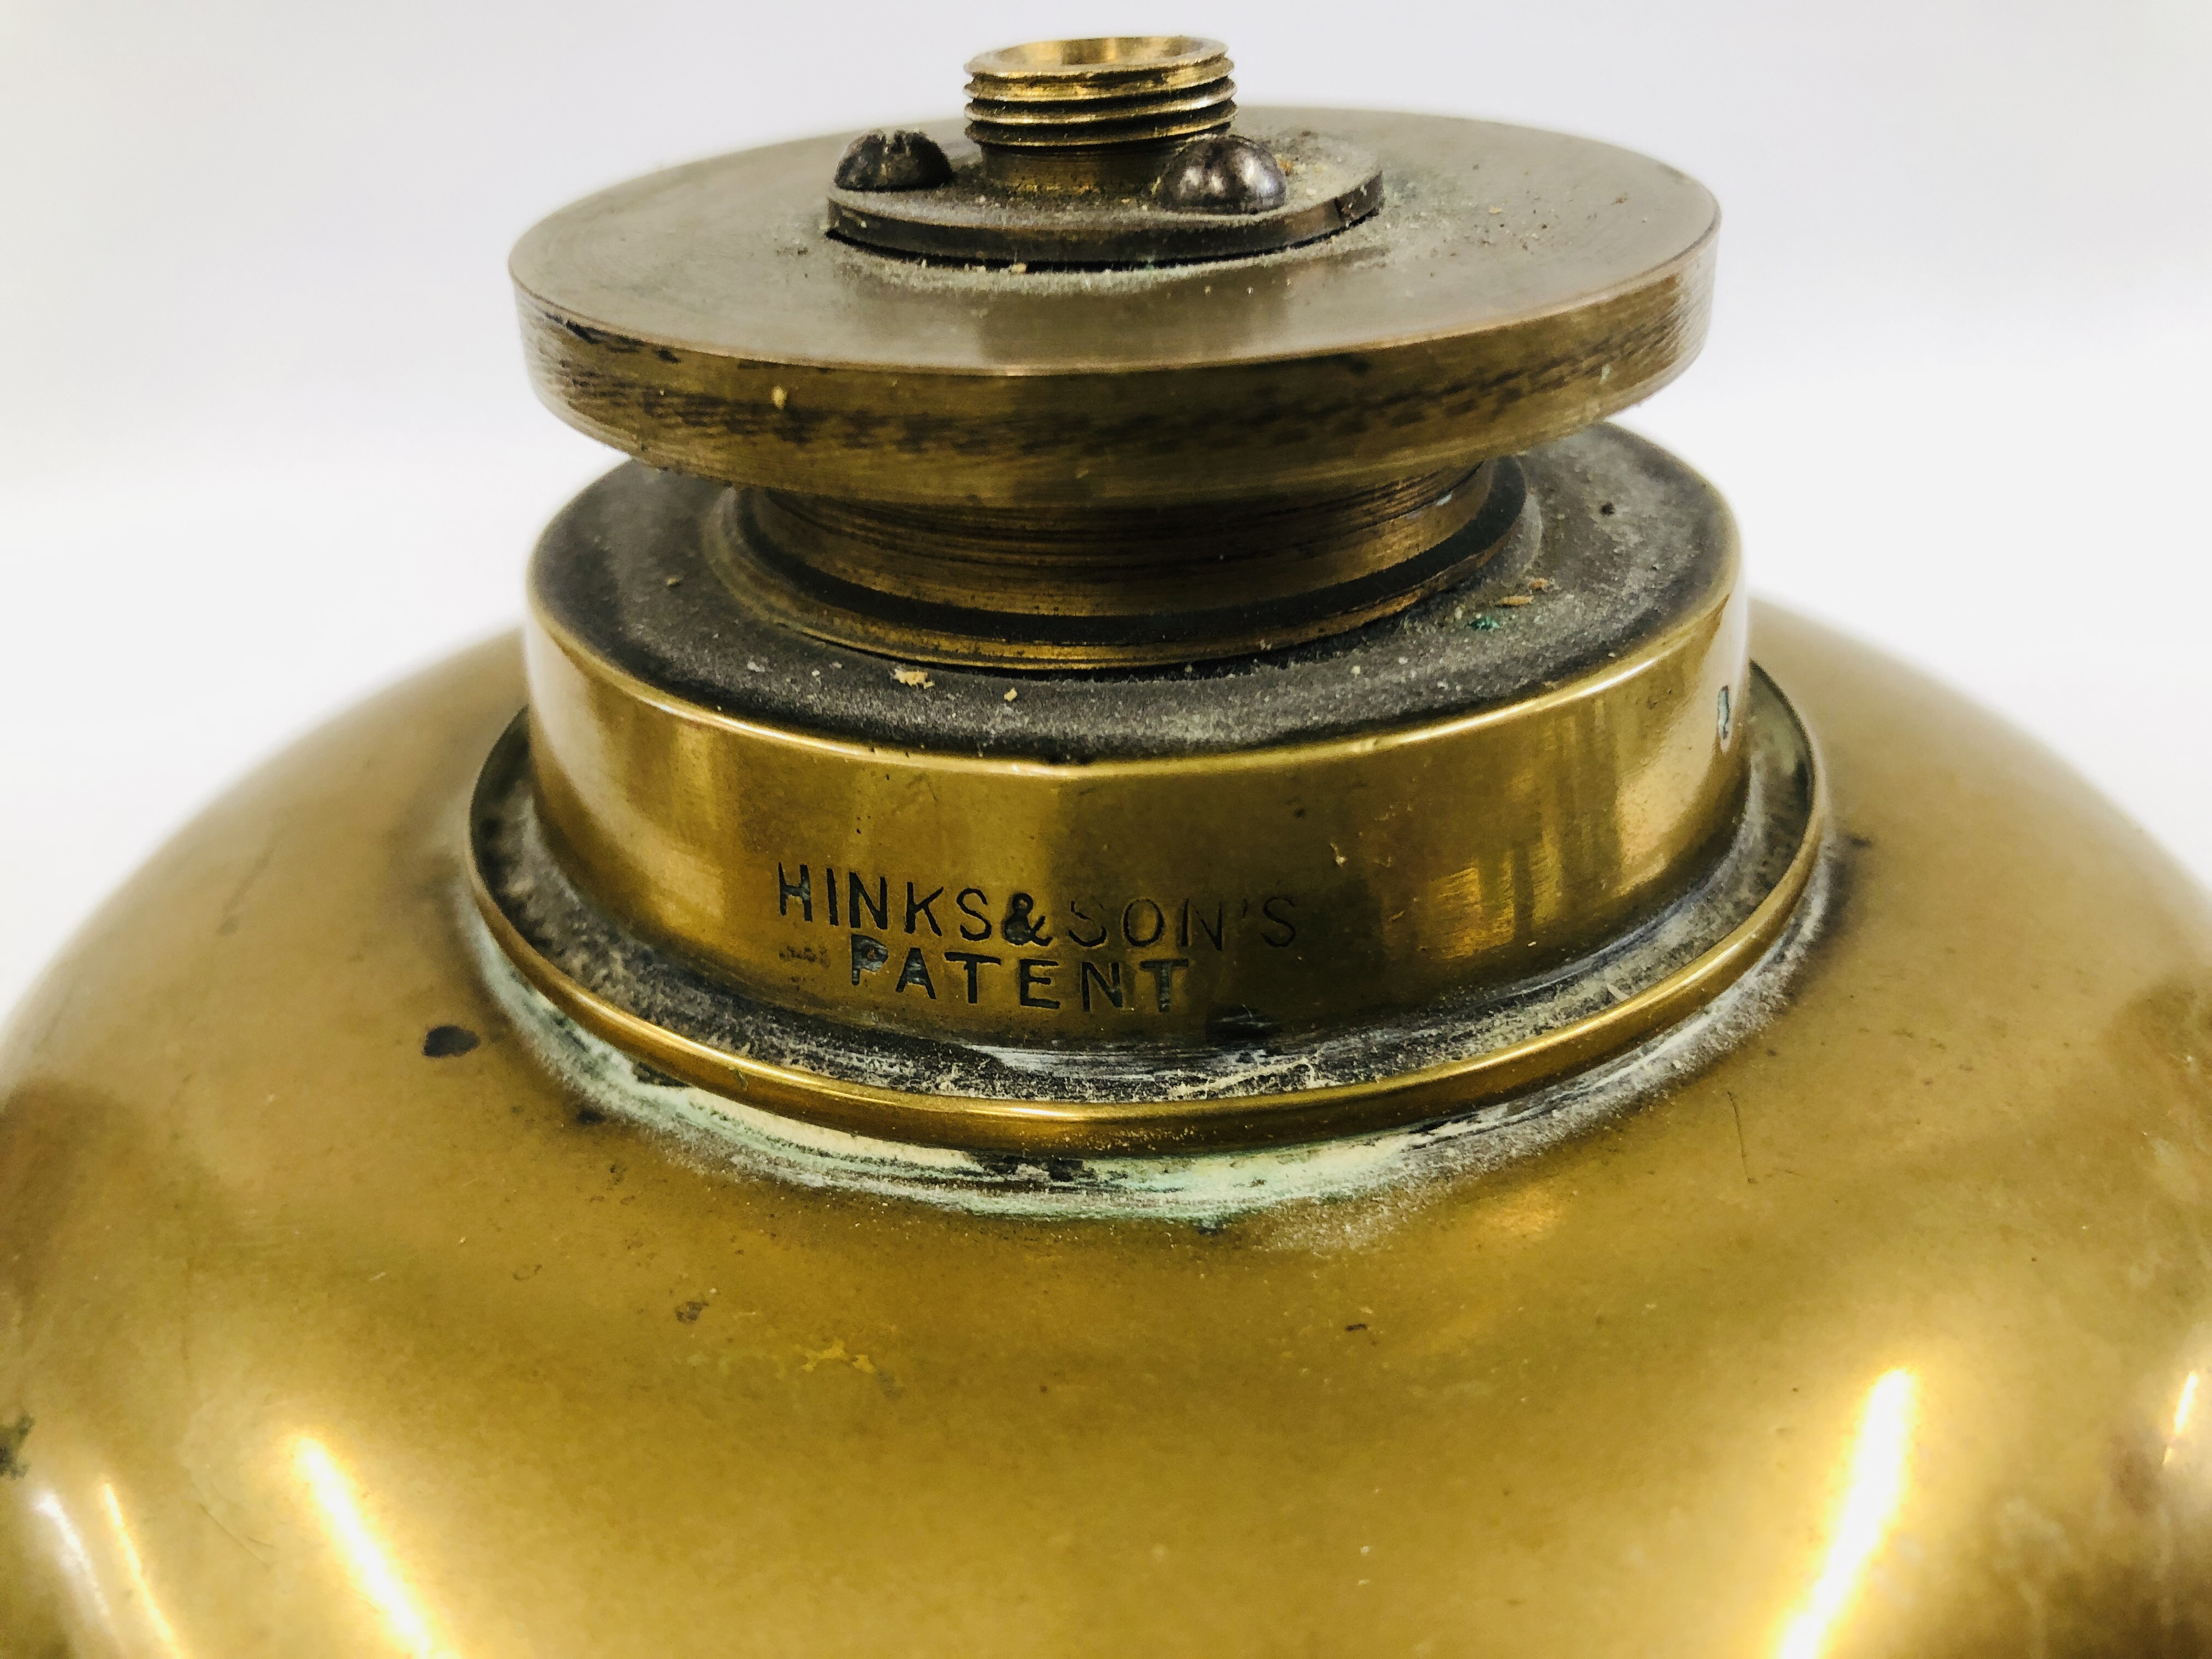 A VINTAGE BRASS OIL LAMP STAMPED WITH ORIGINAL MAKERS MARK "HINKS & SONS" PATENT - H 30CM. - Image 3 of 4